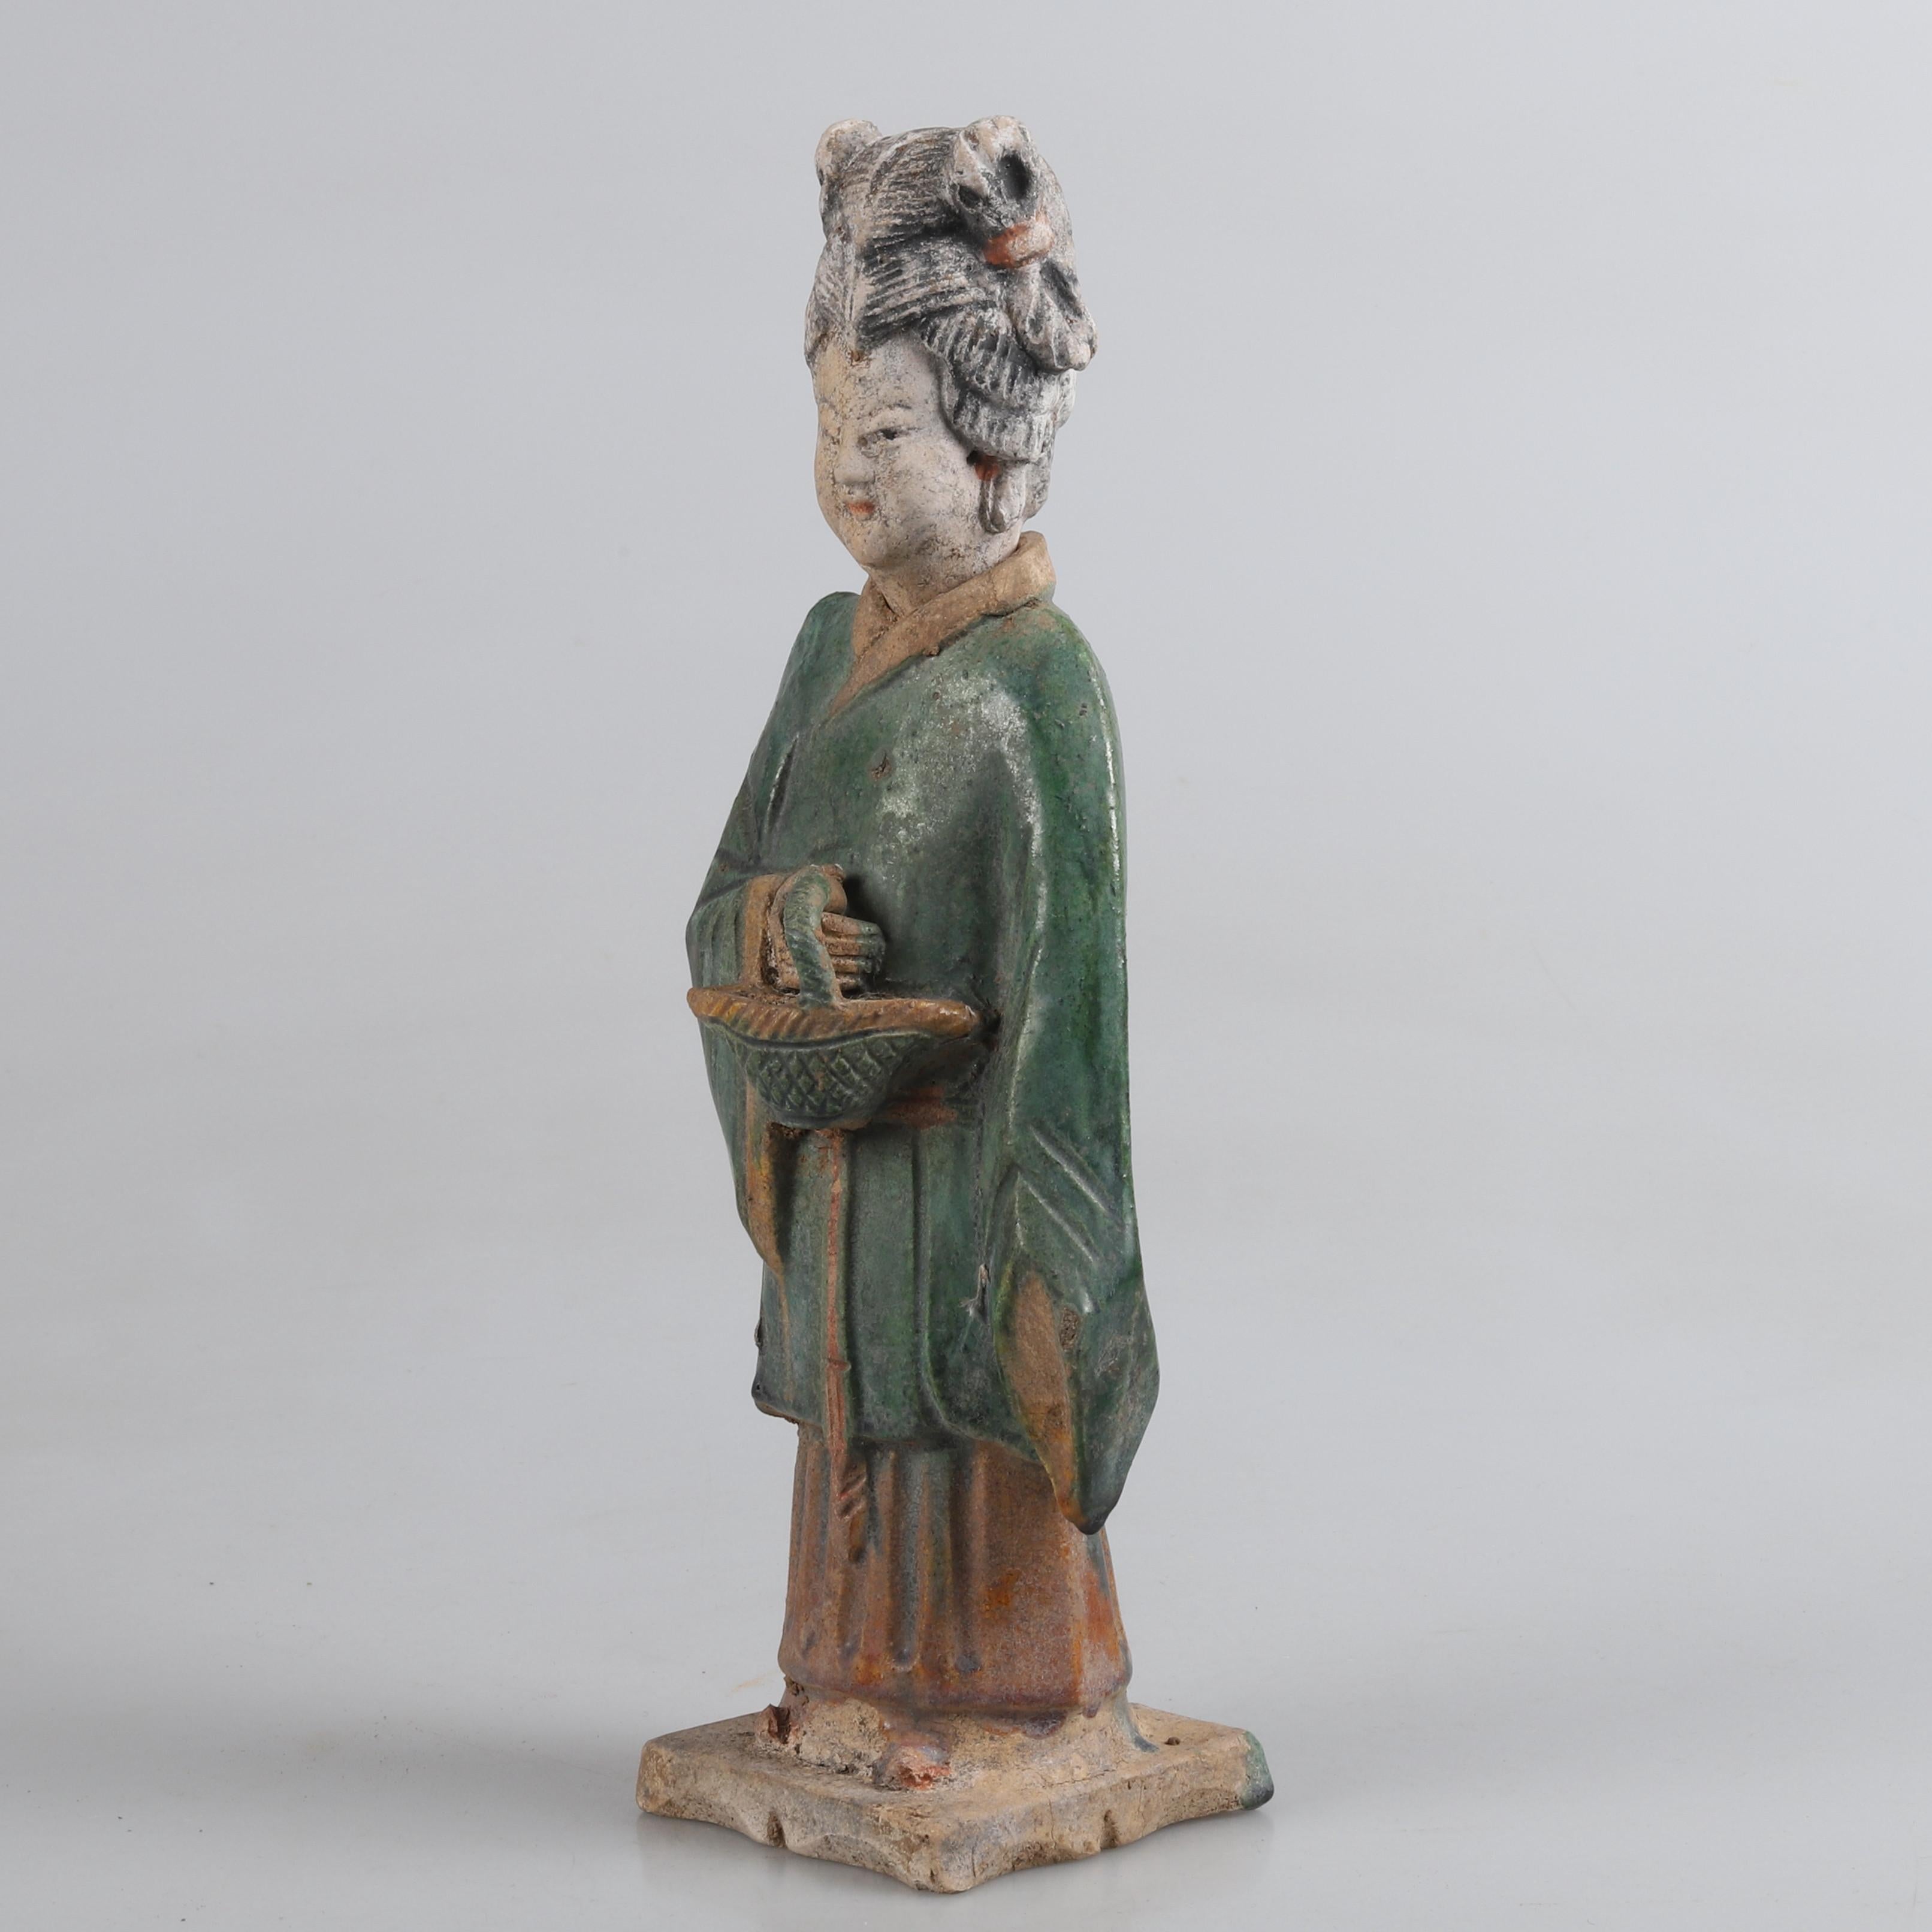 A fine green-glazed Chinese Ming Dynasty earthenware figure. In form of a female funeral guide, glazed and painted in green, yellow, red and black It has been styled in long, flowing robes, colored a vivid green. Additional features have been